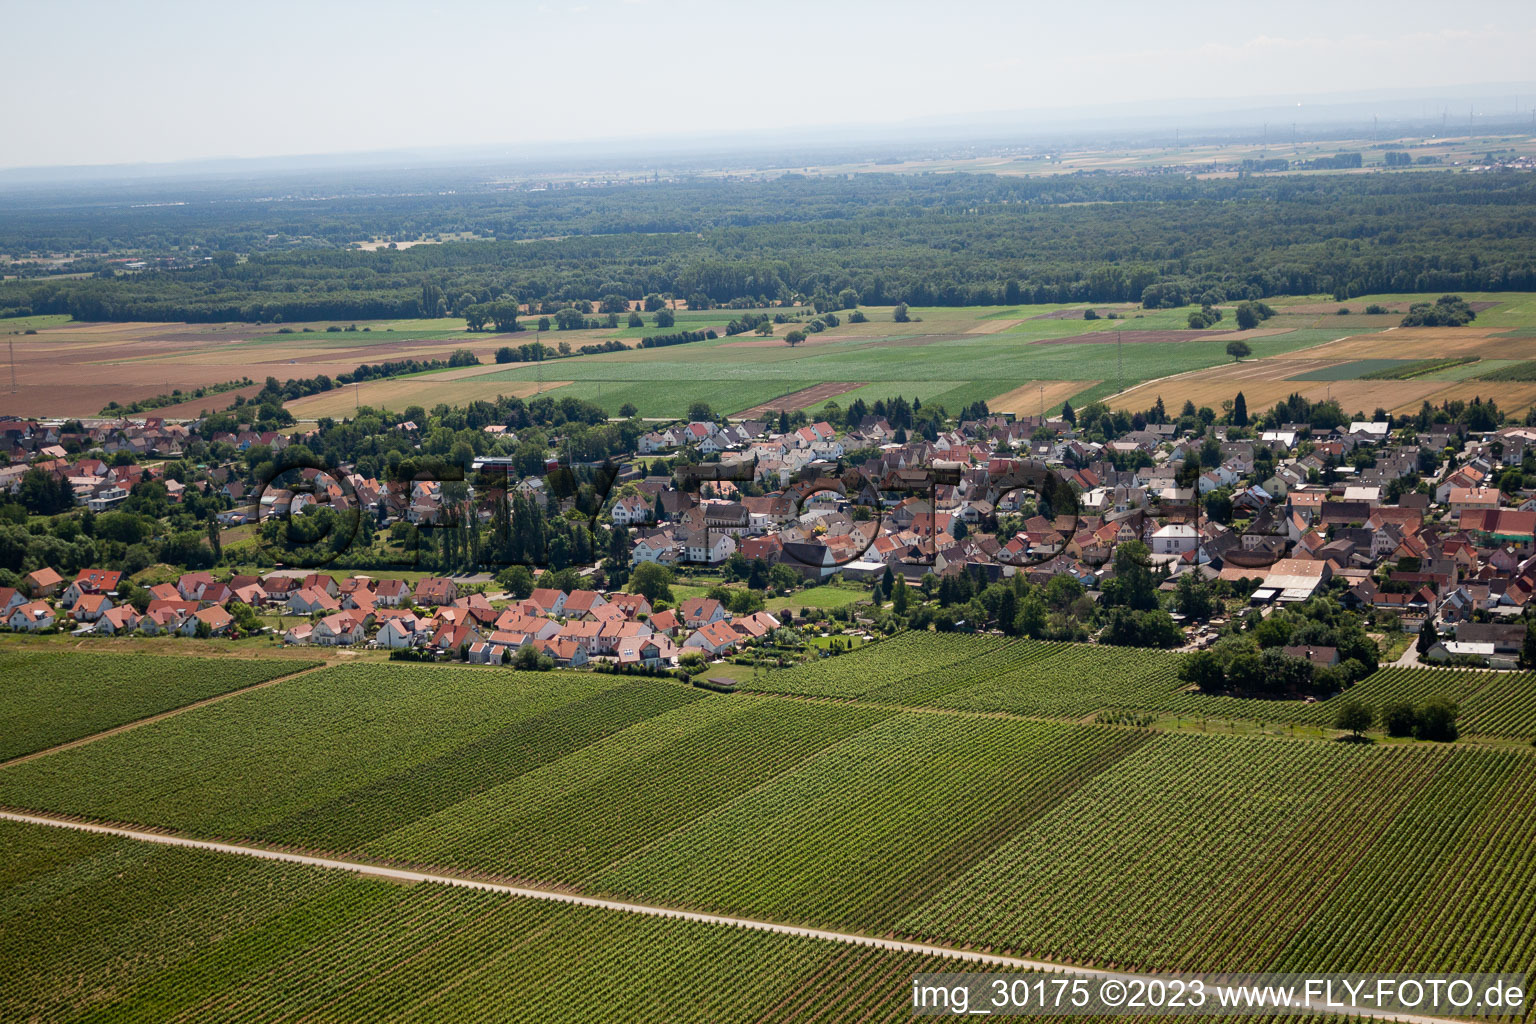 Bird's eye view of Hochstadt in the state Rhineland-Palatinate, Germany